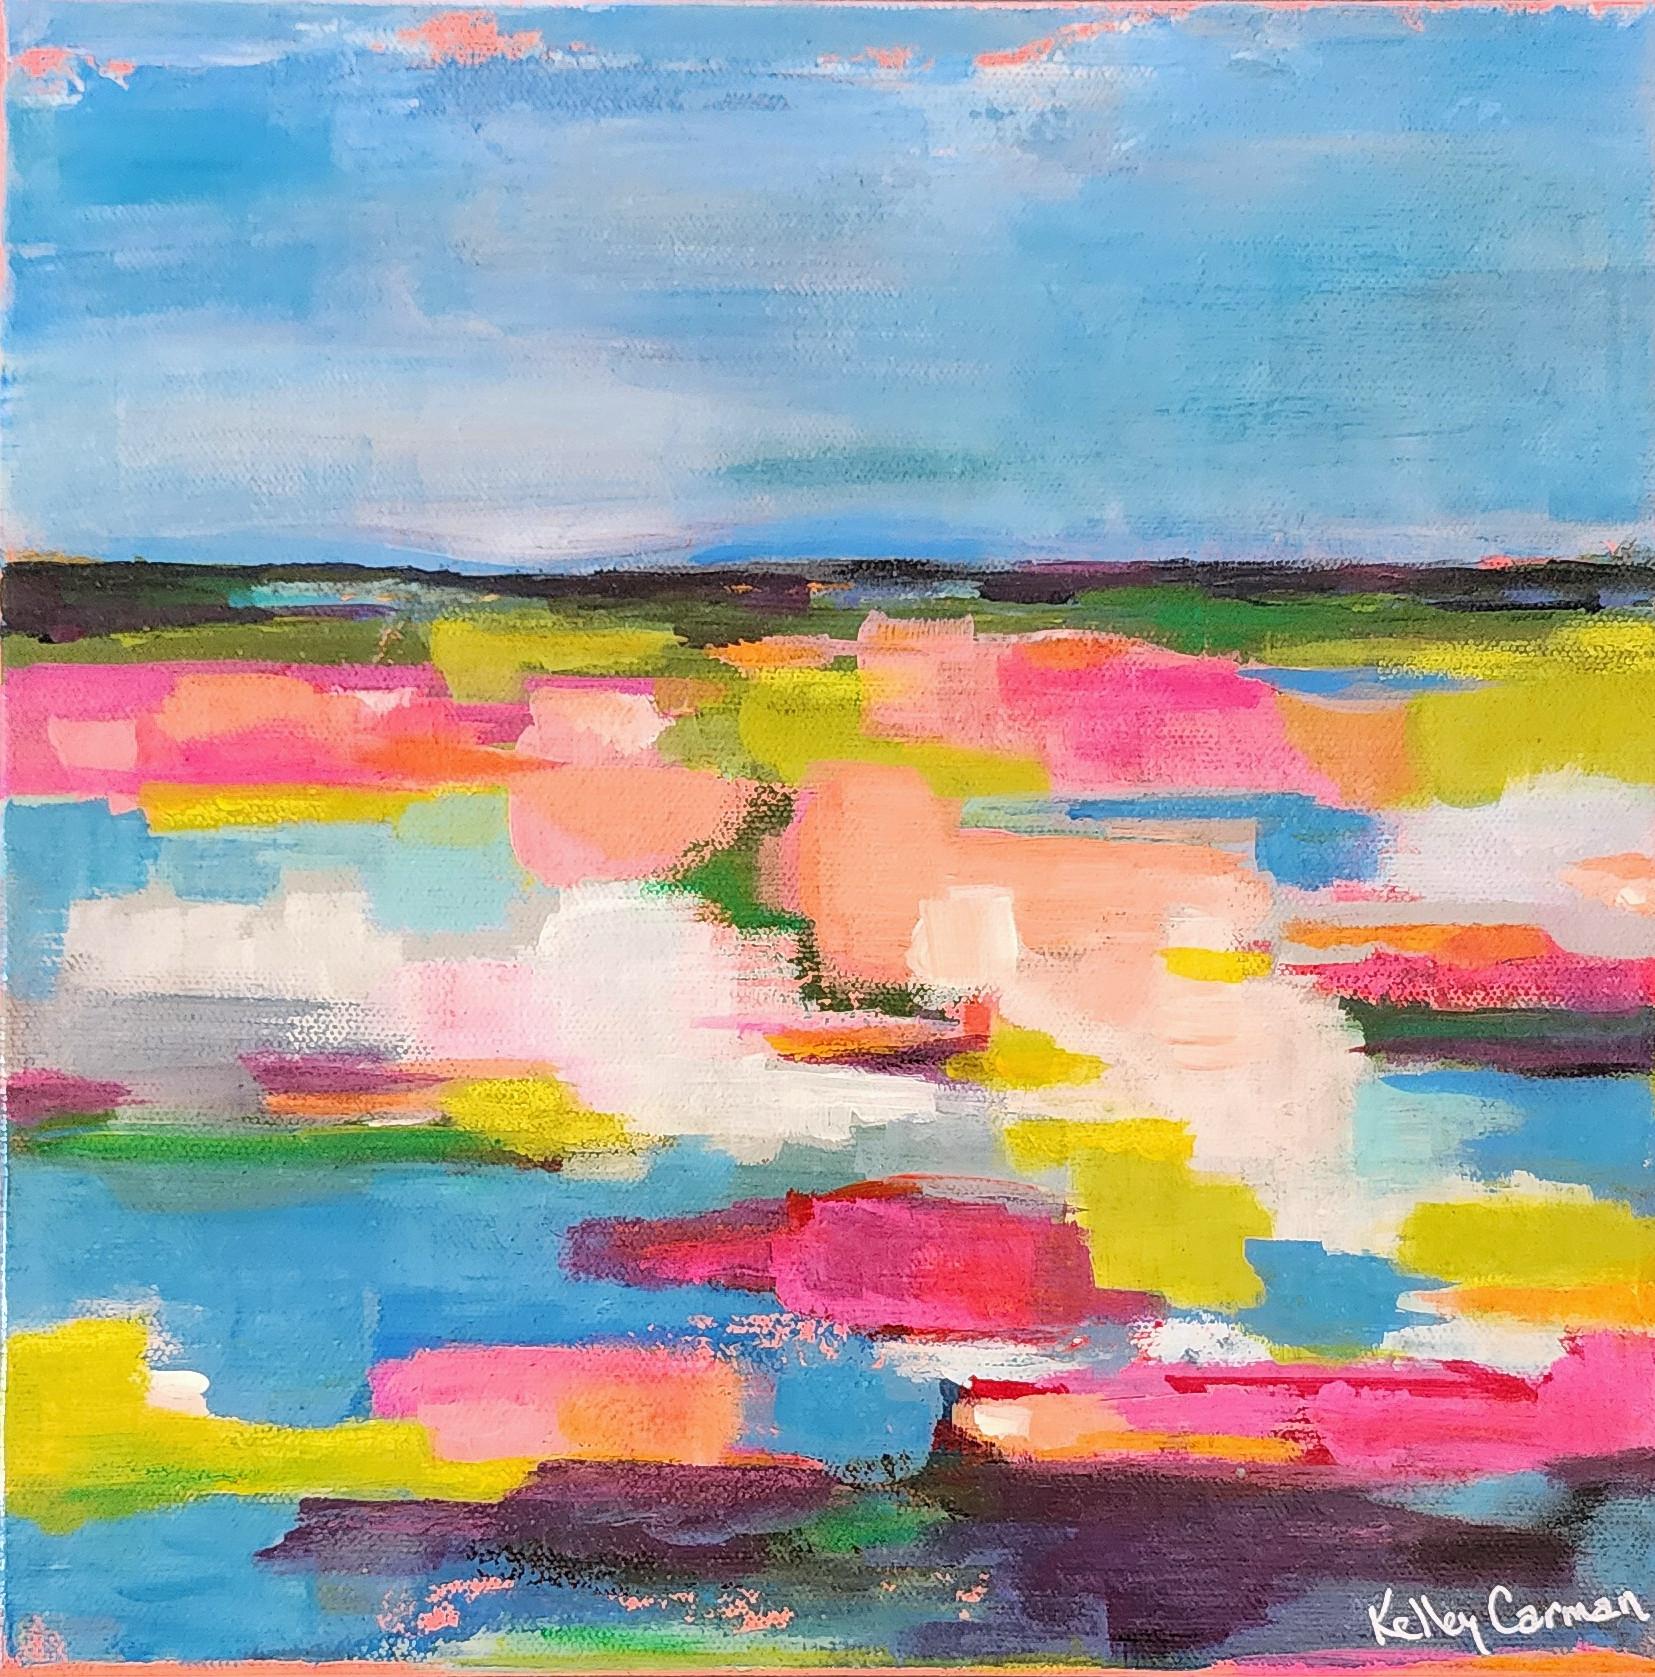 Kelley Carman Landscape Painting - Change in Latitudes (Gestural Abstract, Colorful, Blue, Pink, Yellow, Green)